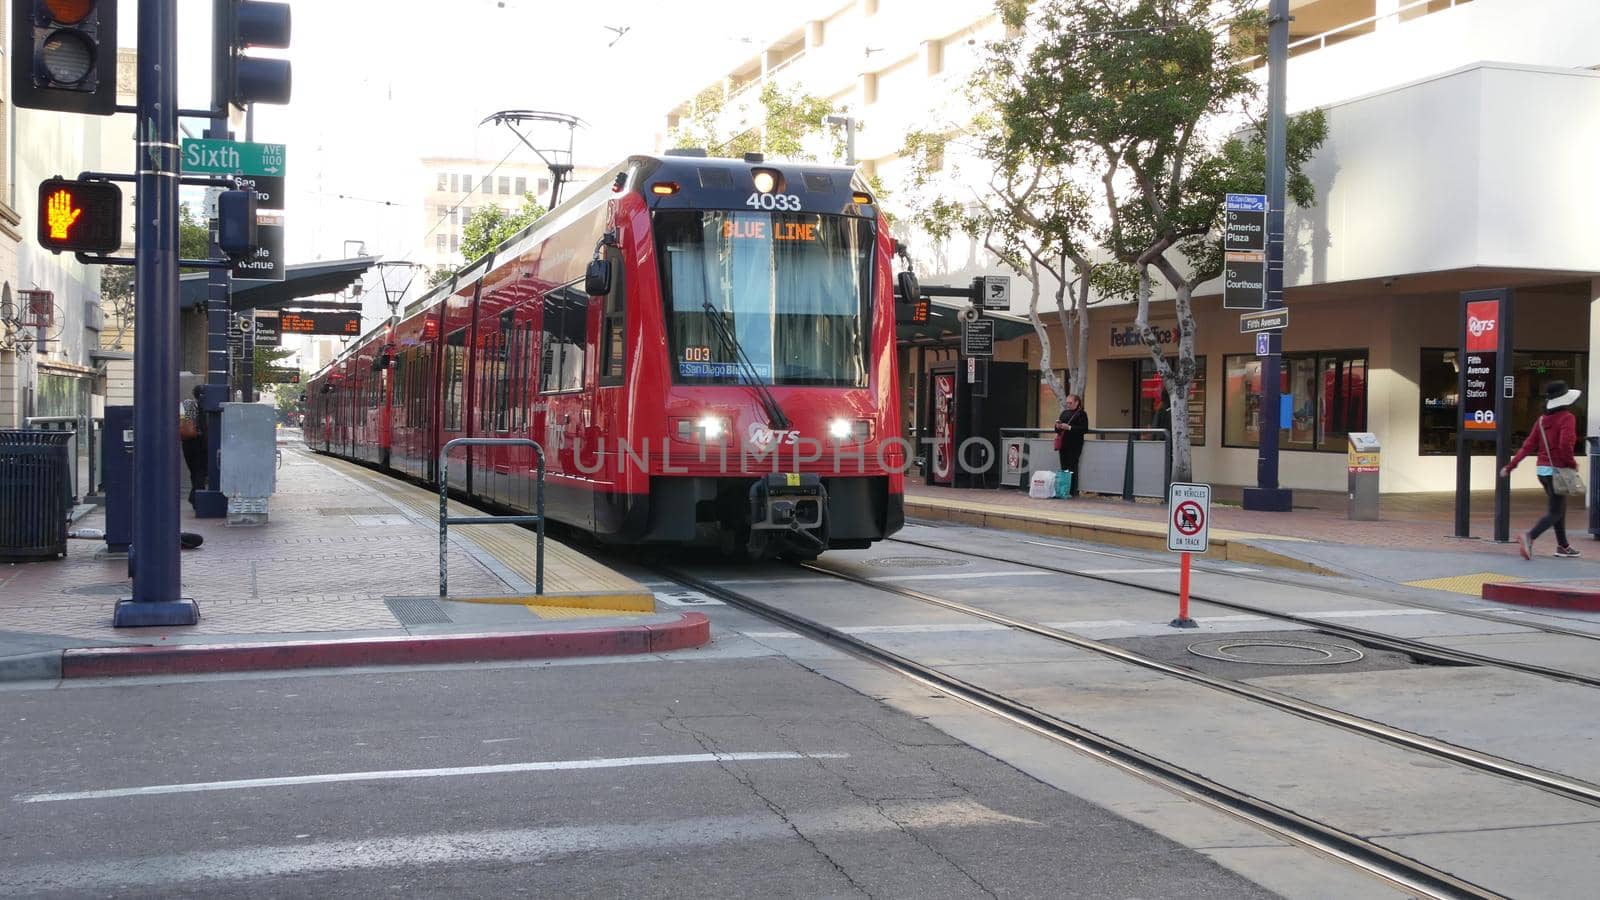 SAN DIEGO, CALIFORNIA USA - 4 JAN 2020: MTS Trolley on tramway, ecological public passenger transportation. Electric tram line station in Gaslamp Quarter. City transport stop on crossroad of downtown.